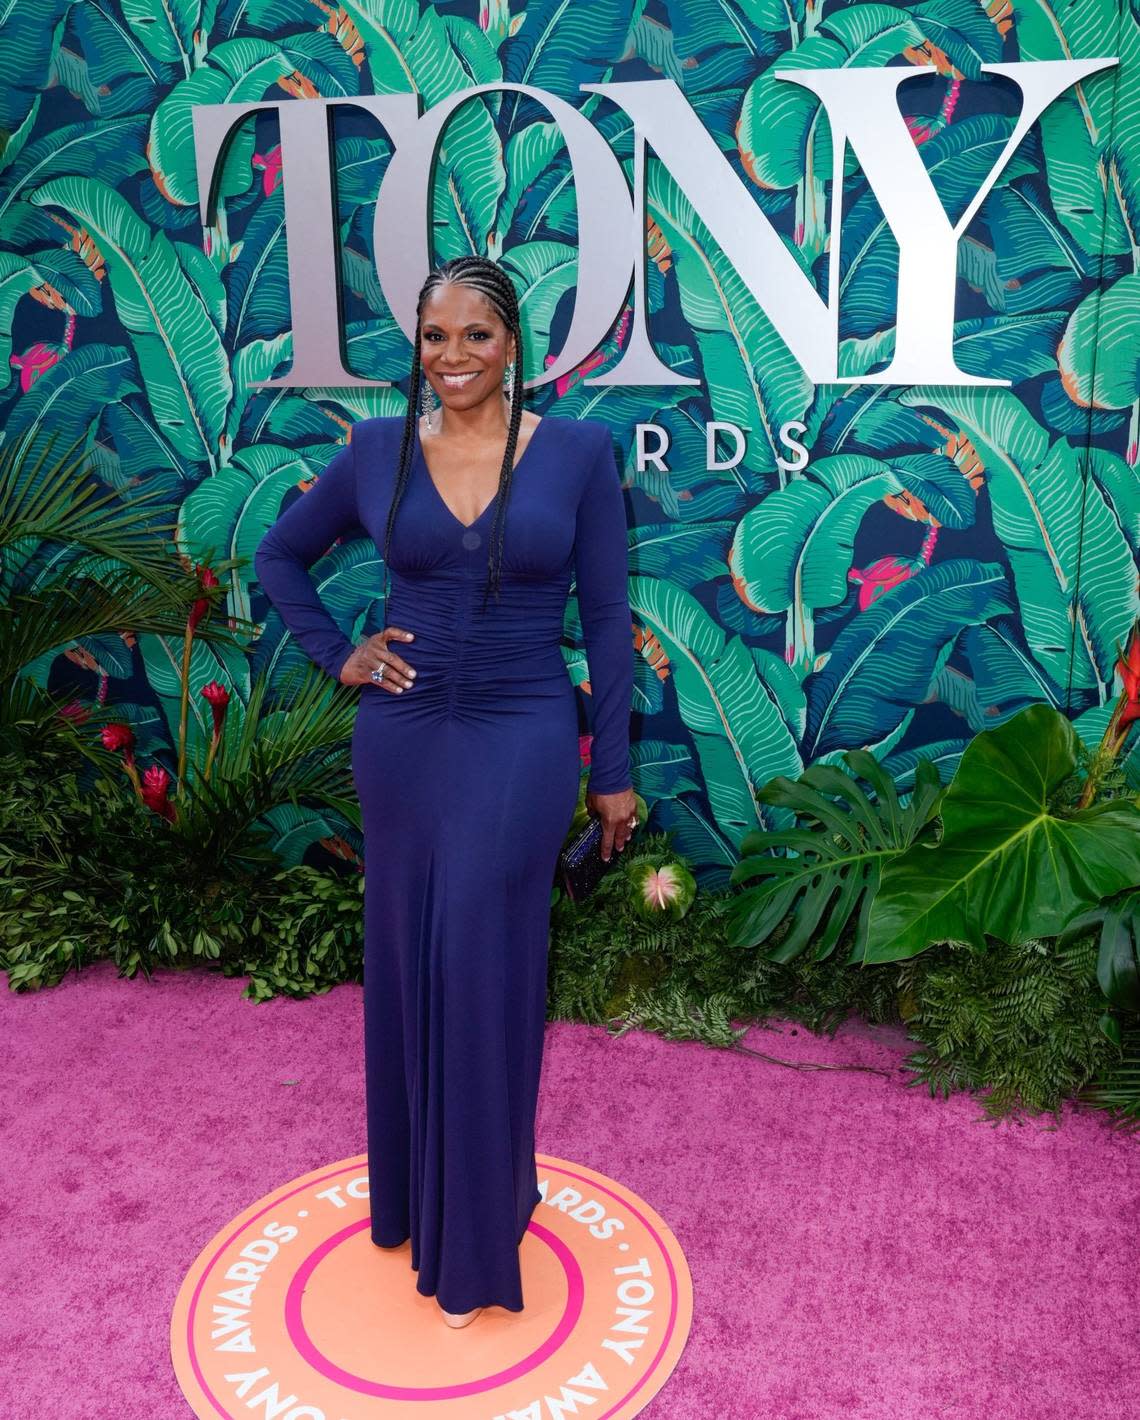 Audra McDonald attended this year’s Tony Awards ceremony in New York. She received her 10th nomination, this time for her leading role in the play “Ohio State Murders.”